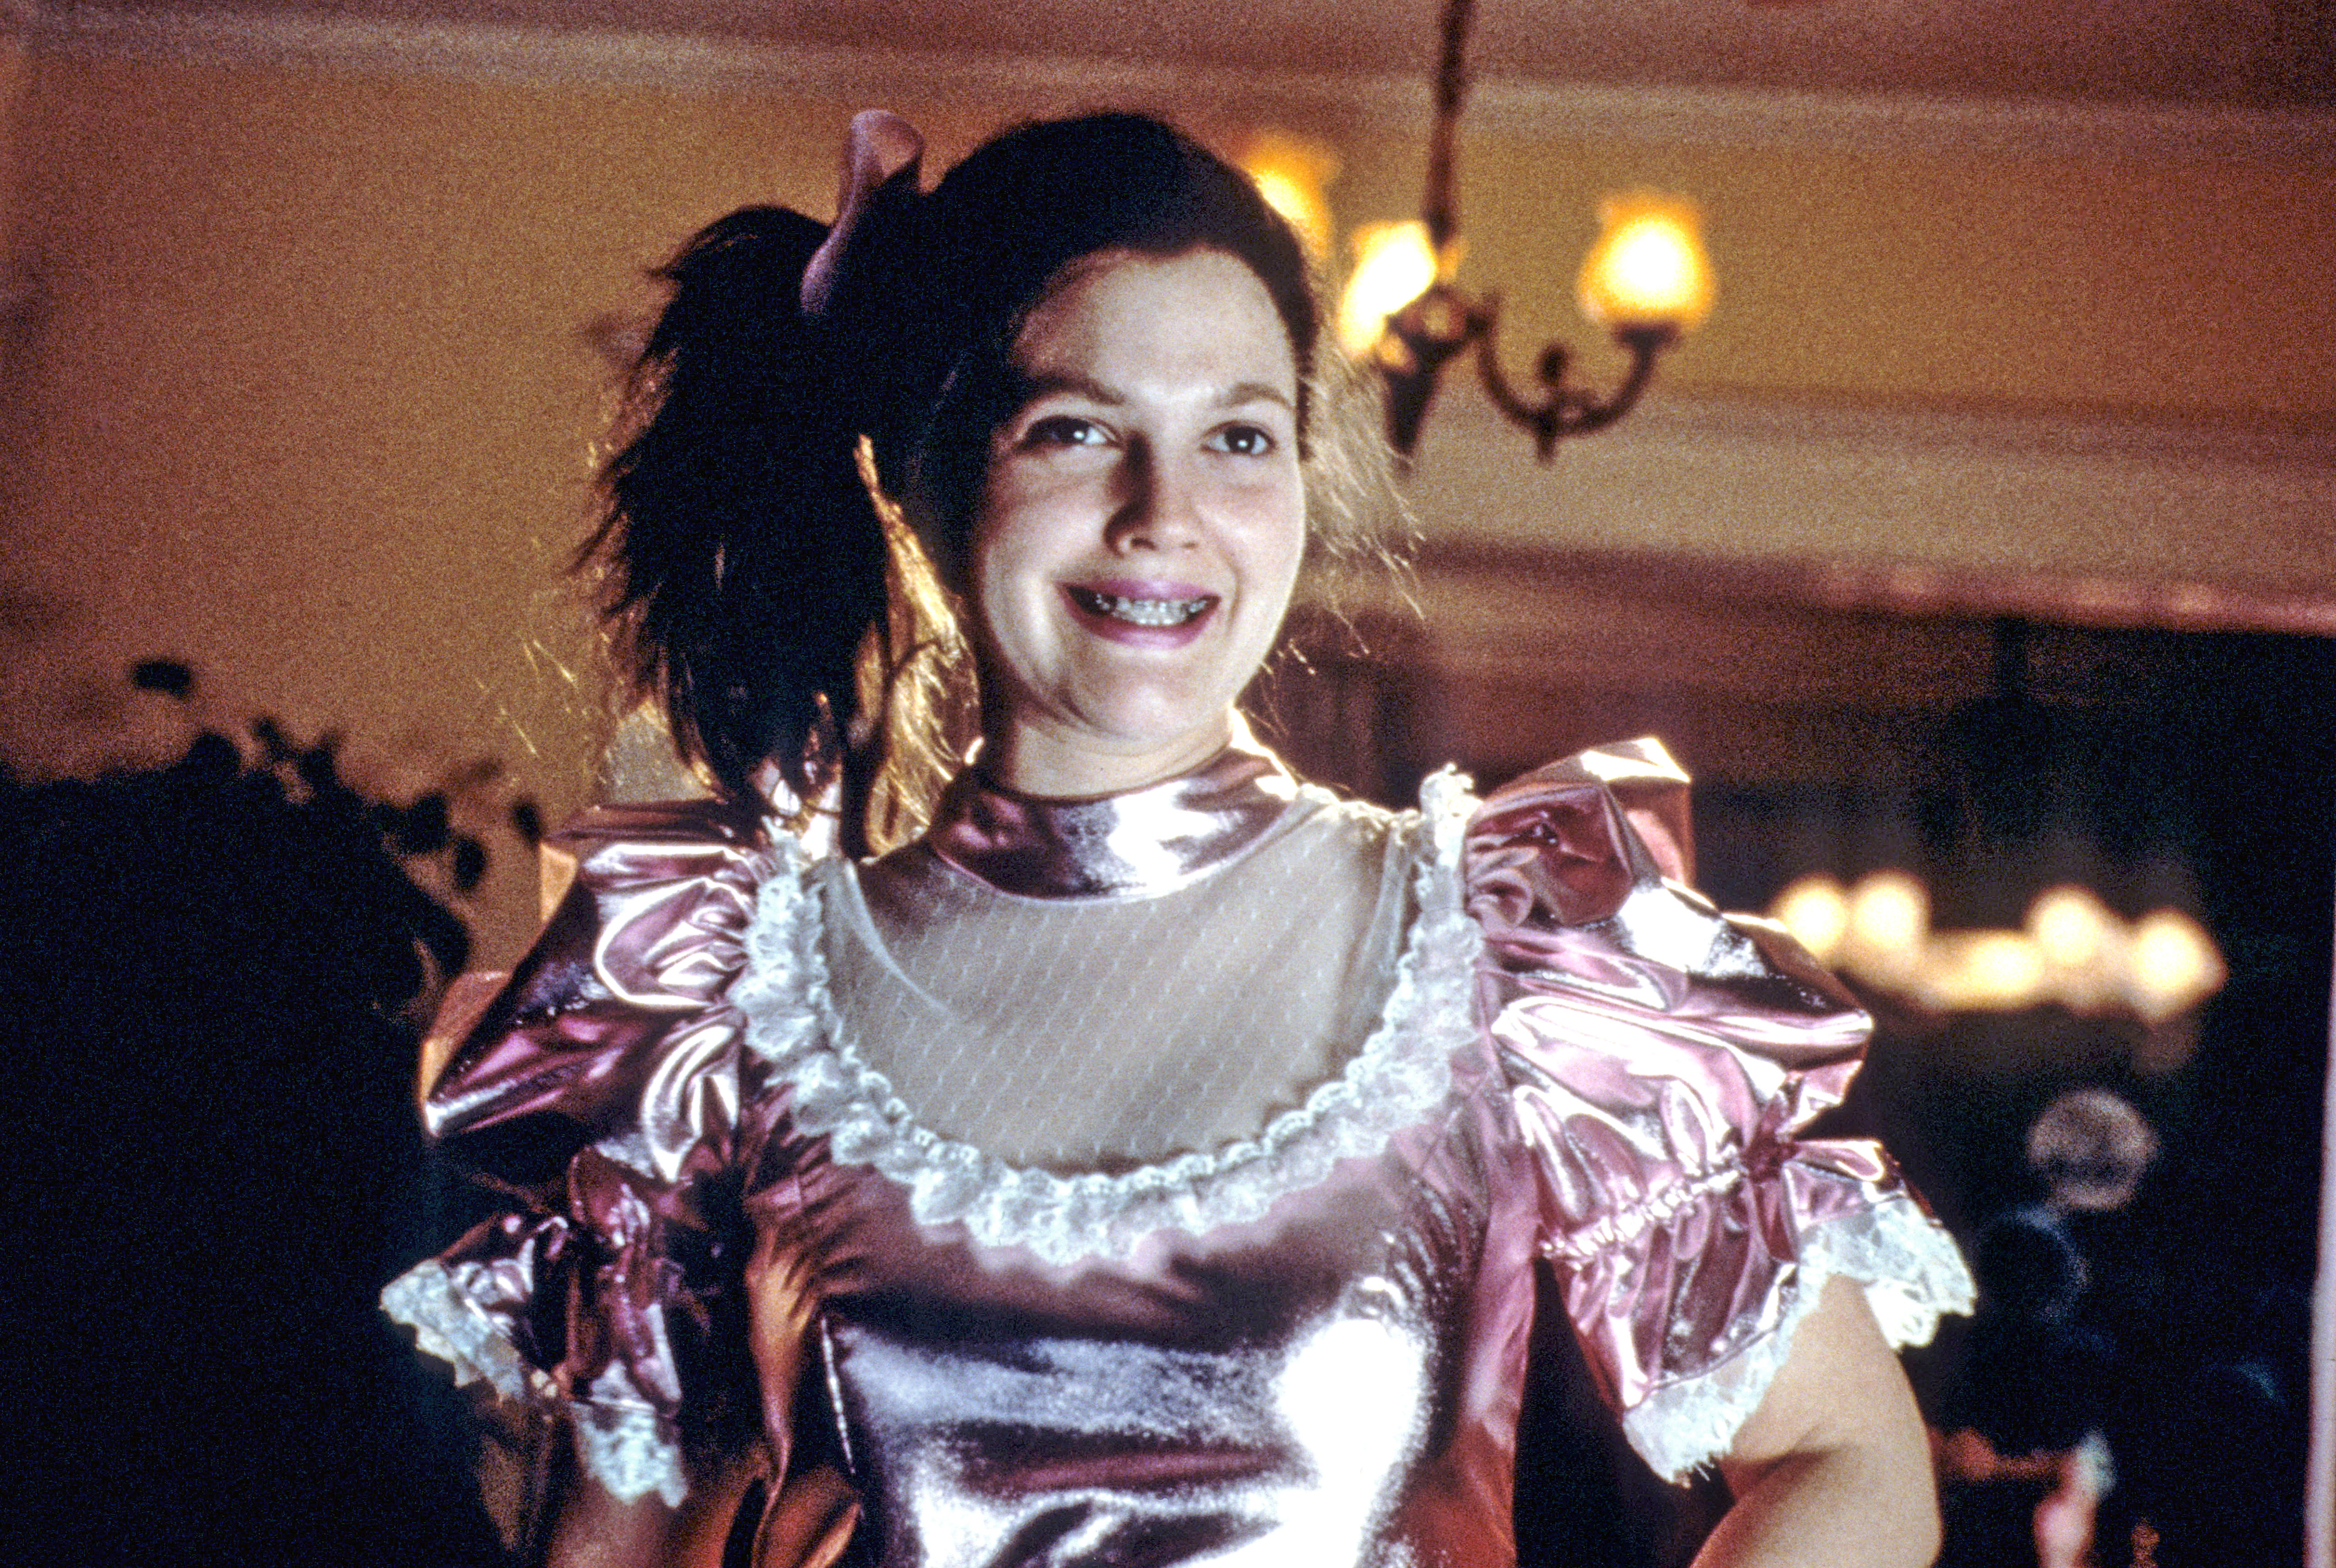 Drew Barrymore in a Victorian-style pink dress with puffed sleeves, as seen in the movie &#x27;Never Been Kissed&#x27;